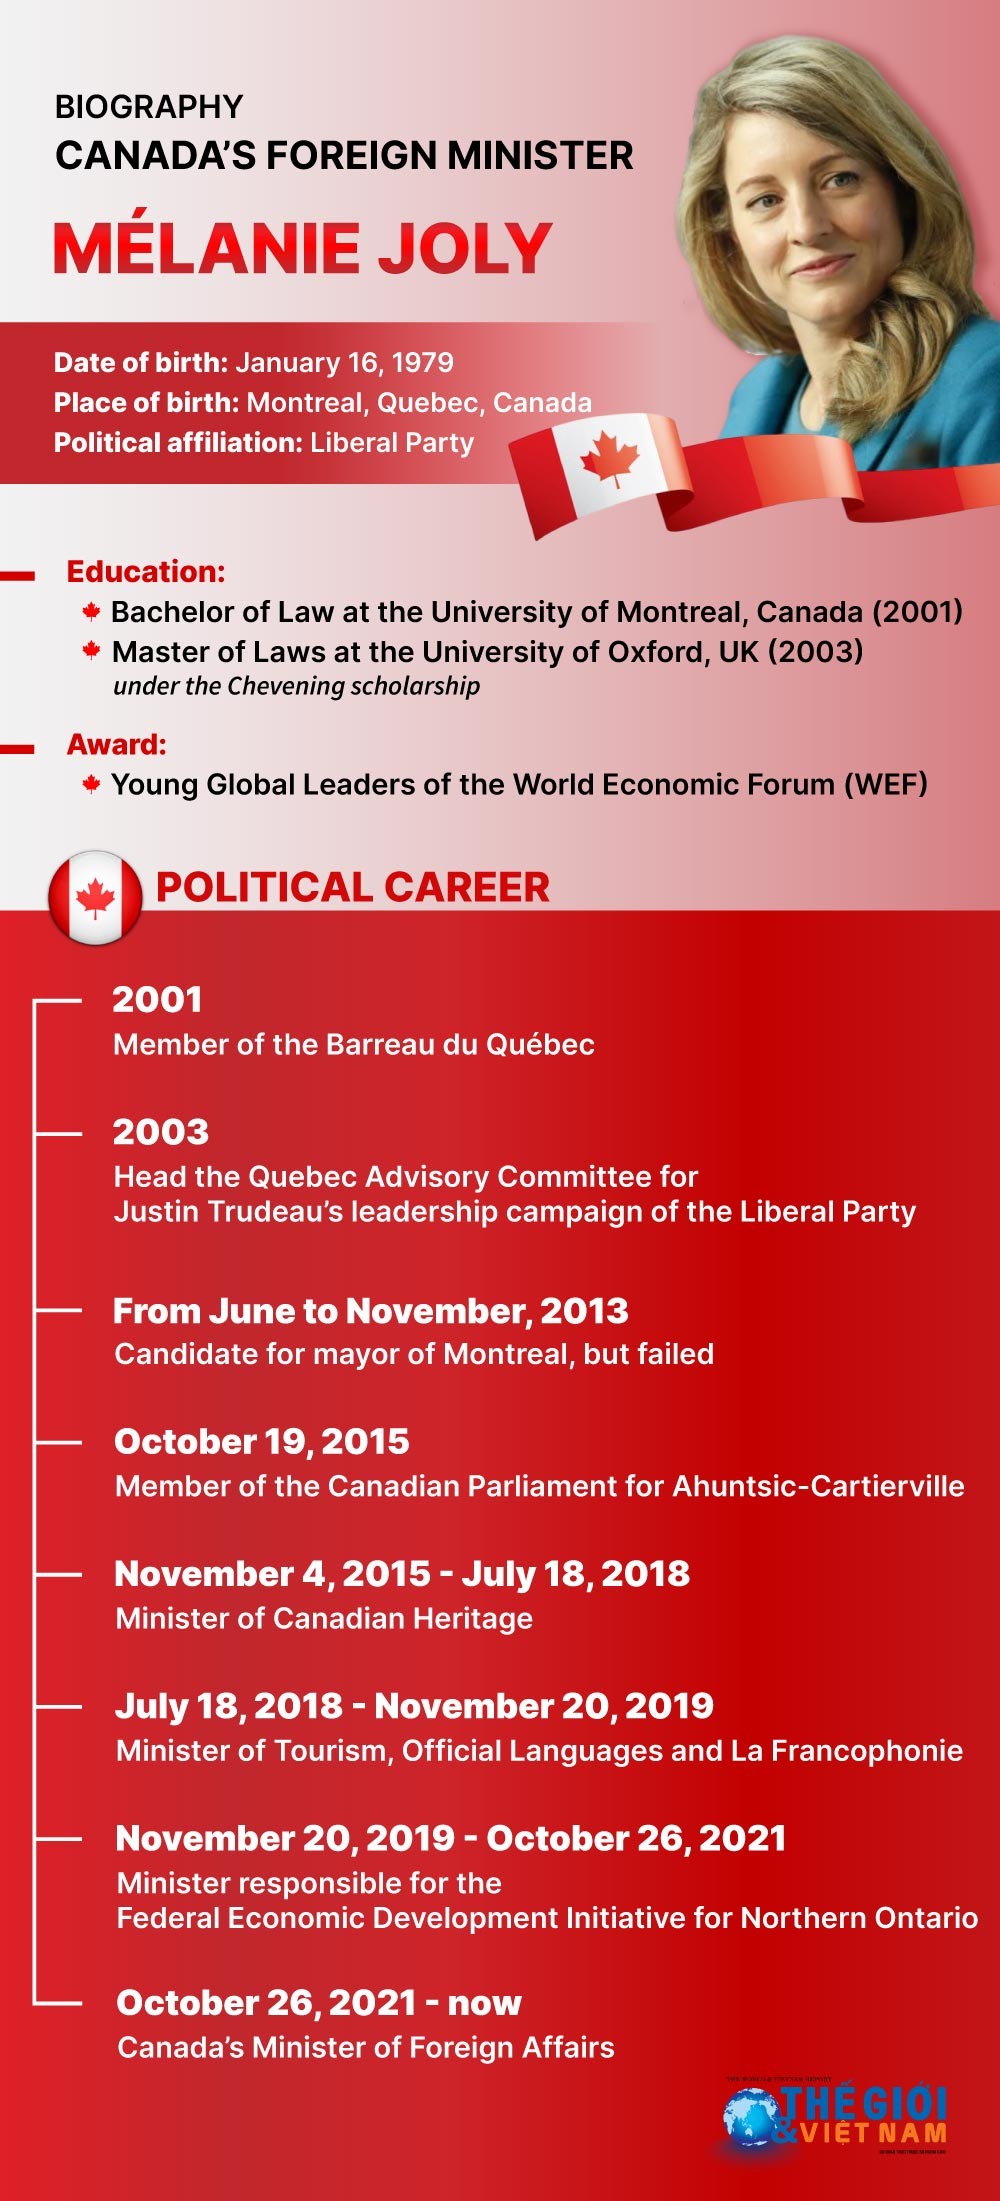 Biography of Canada’s Minister of Foreign Affairs Melanie Joly